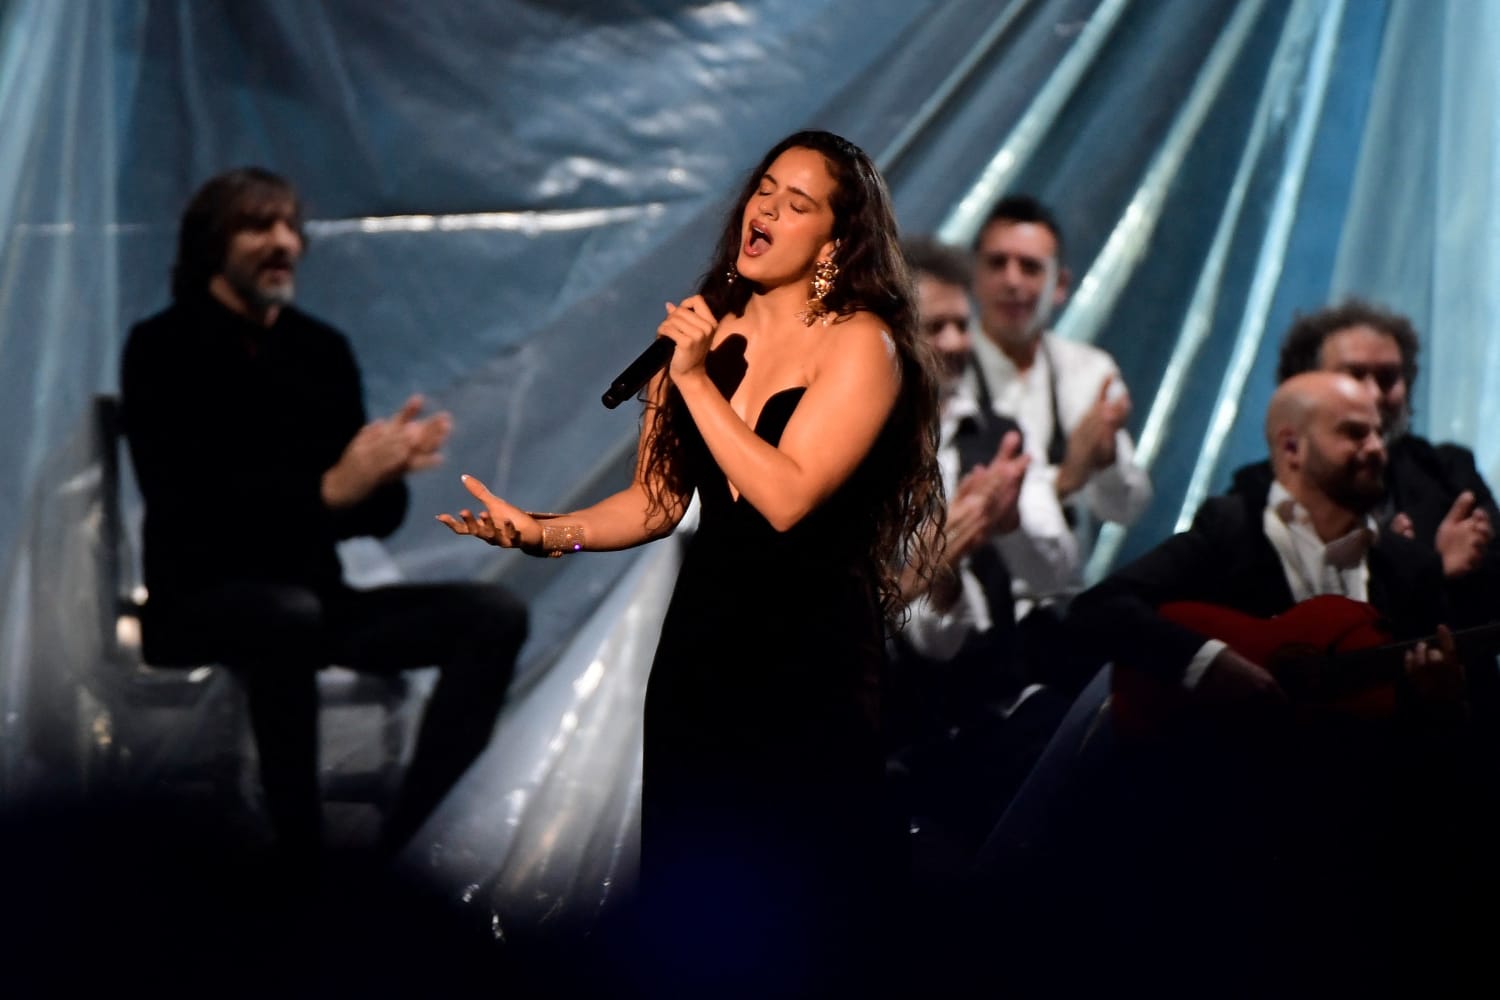 How to Watch the 2023 Latin Grammys Live for Free